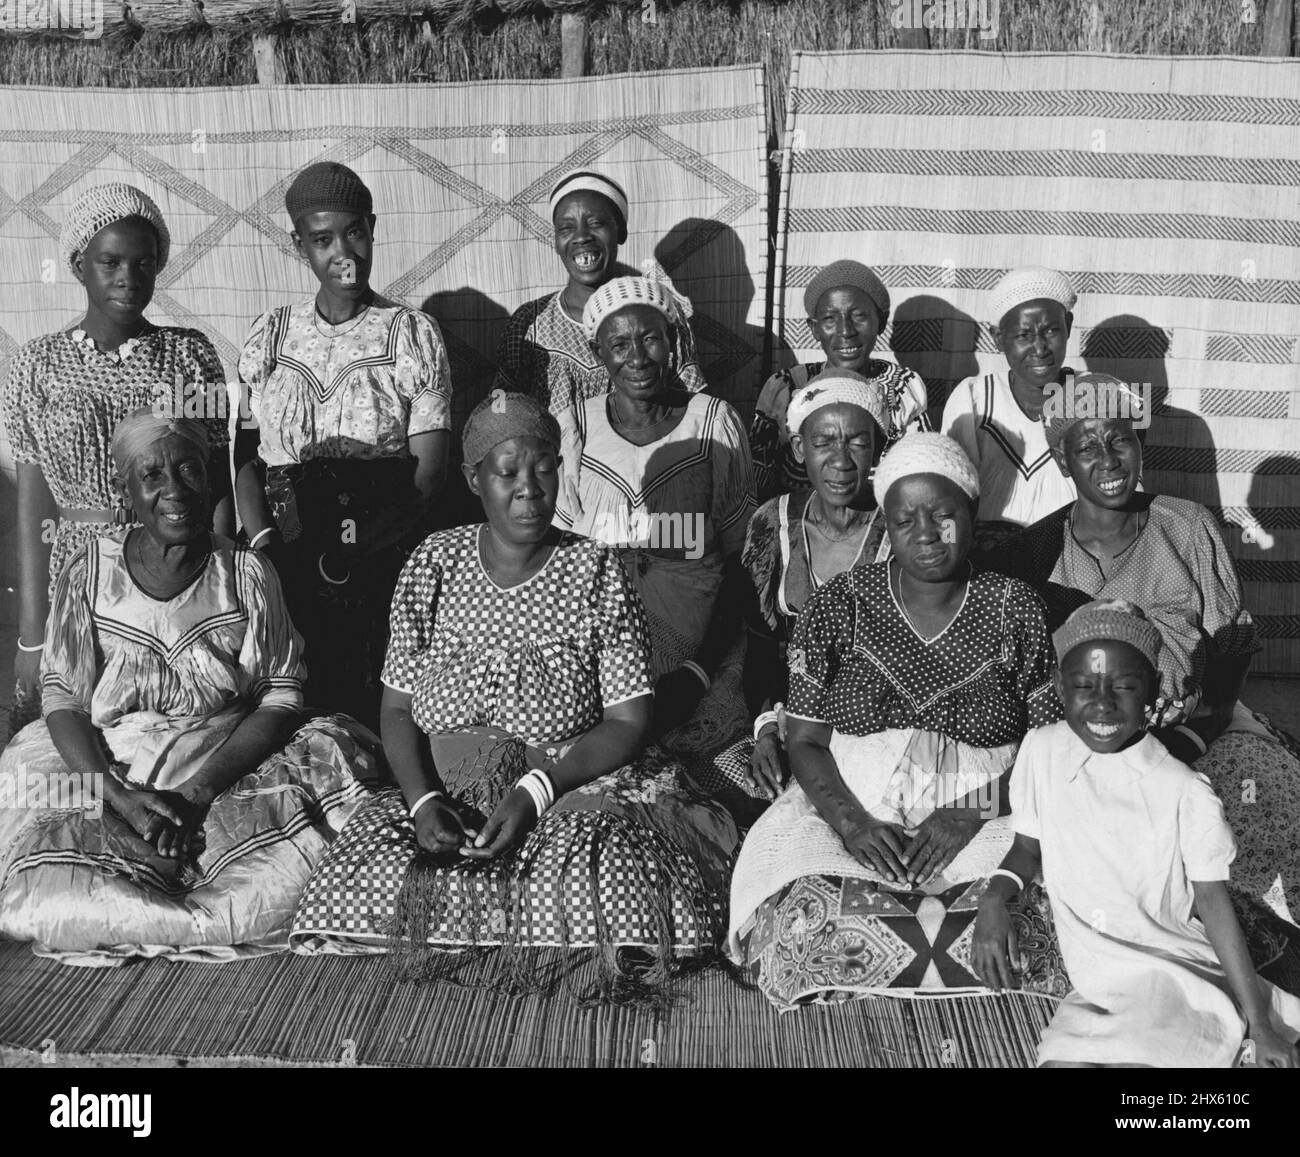 Barotse Women -- A group of the Paramount Chief's family in their traditional dress. In the front row on the left is the Chief's aunt wearing a dress of fine silk that has been her proud possession for almost fifty years. On the right is the Chief's grandchild. June 23, 1952. (Photo by Nigel Watt, Camera Press).;Barotse Women -- A group of the Paramount Chief's family in their traditional dress. In the front row on the left is the Chief's aunt wearing a dress of fine silk that has been her proud Stock Photo